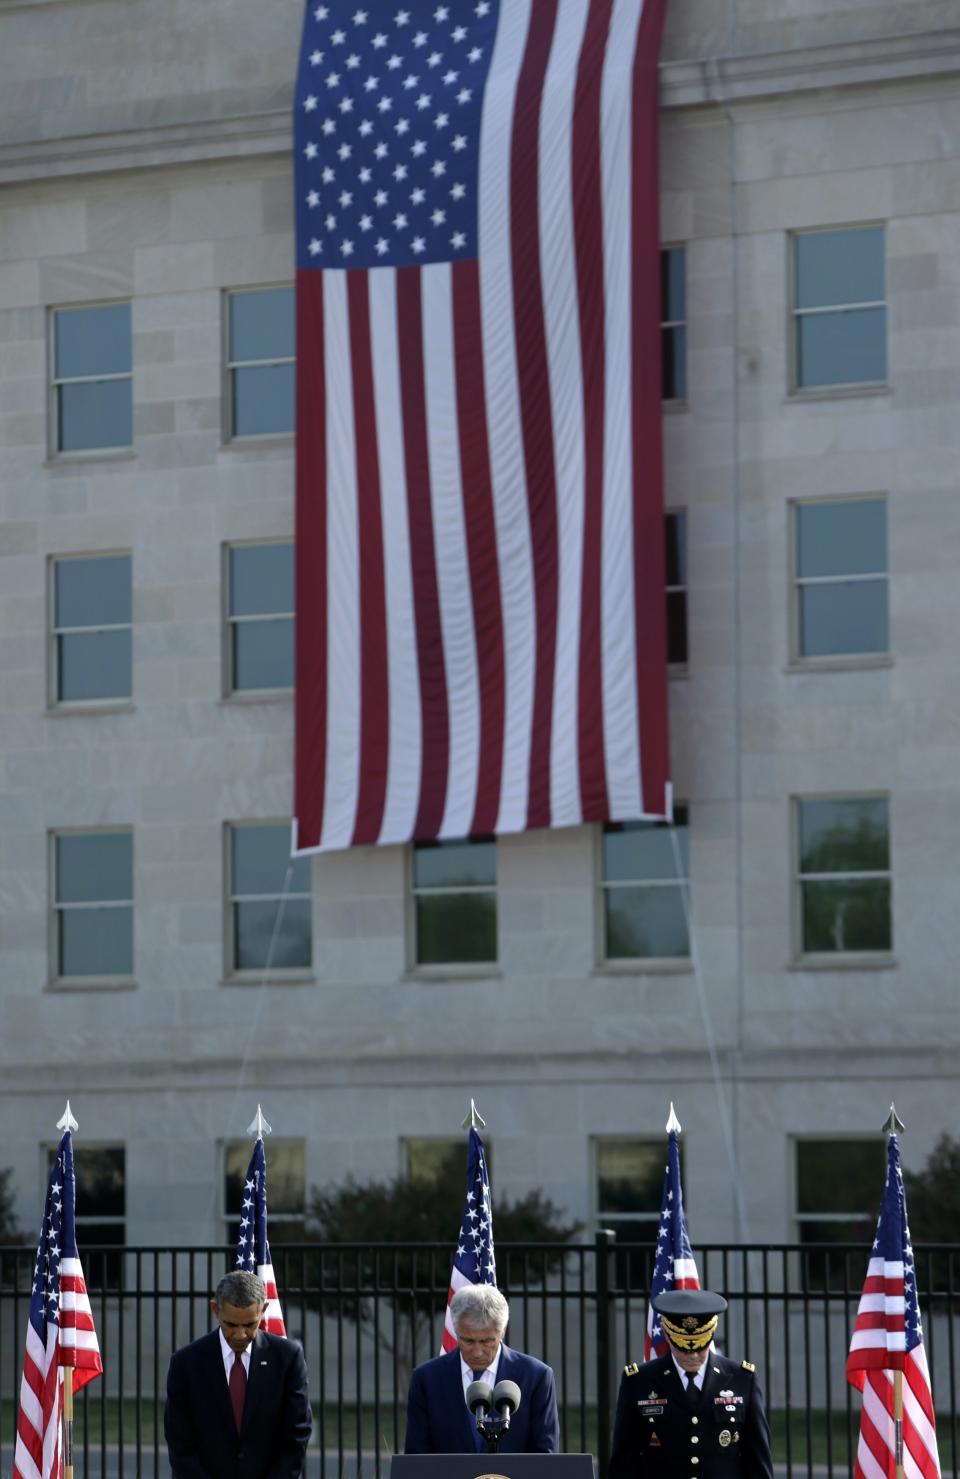 (L-R) U.S. President Barack Obama, Secretary of Defense Chuck Hagel, and Chairman of the Joint Chiefs of Staff U.S. Army General Martin Dempsey attend remembrance ceremonies for 9/11 at the Pentagon 9/11 Memorial in Washington September 11, 2013. The large flag in background marks the point of impact where a jetliner crashed into the Pentagon 12 years ago today. (REUTERS/Gary Cameron)